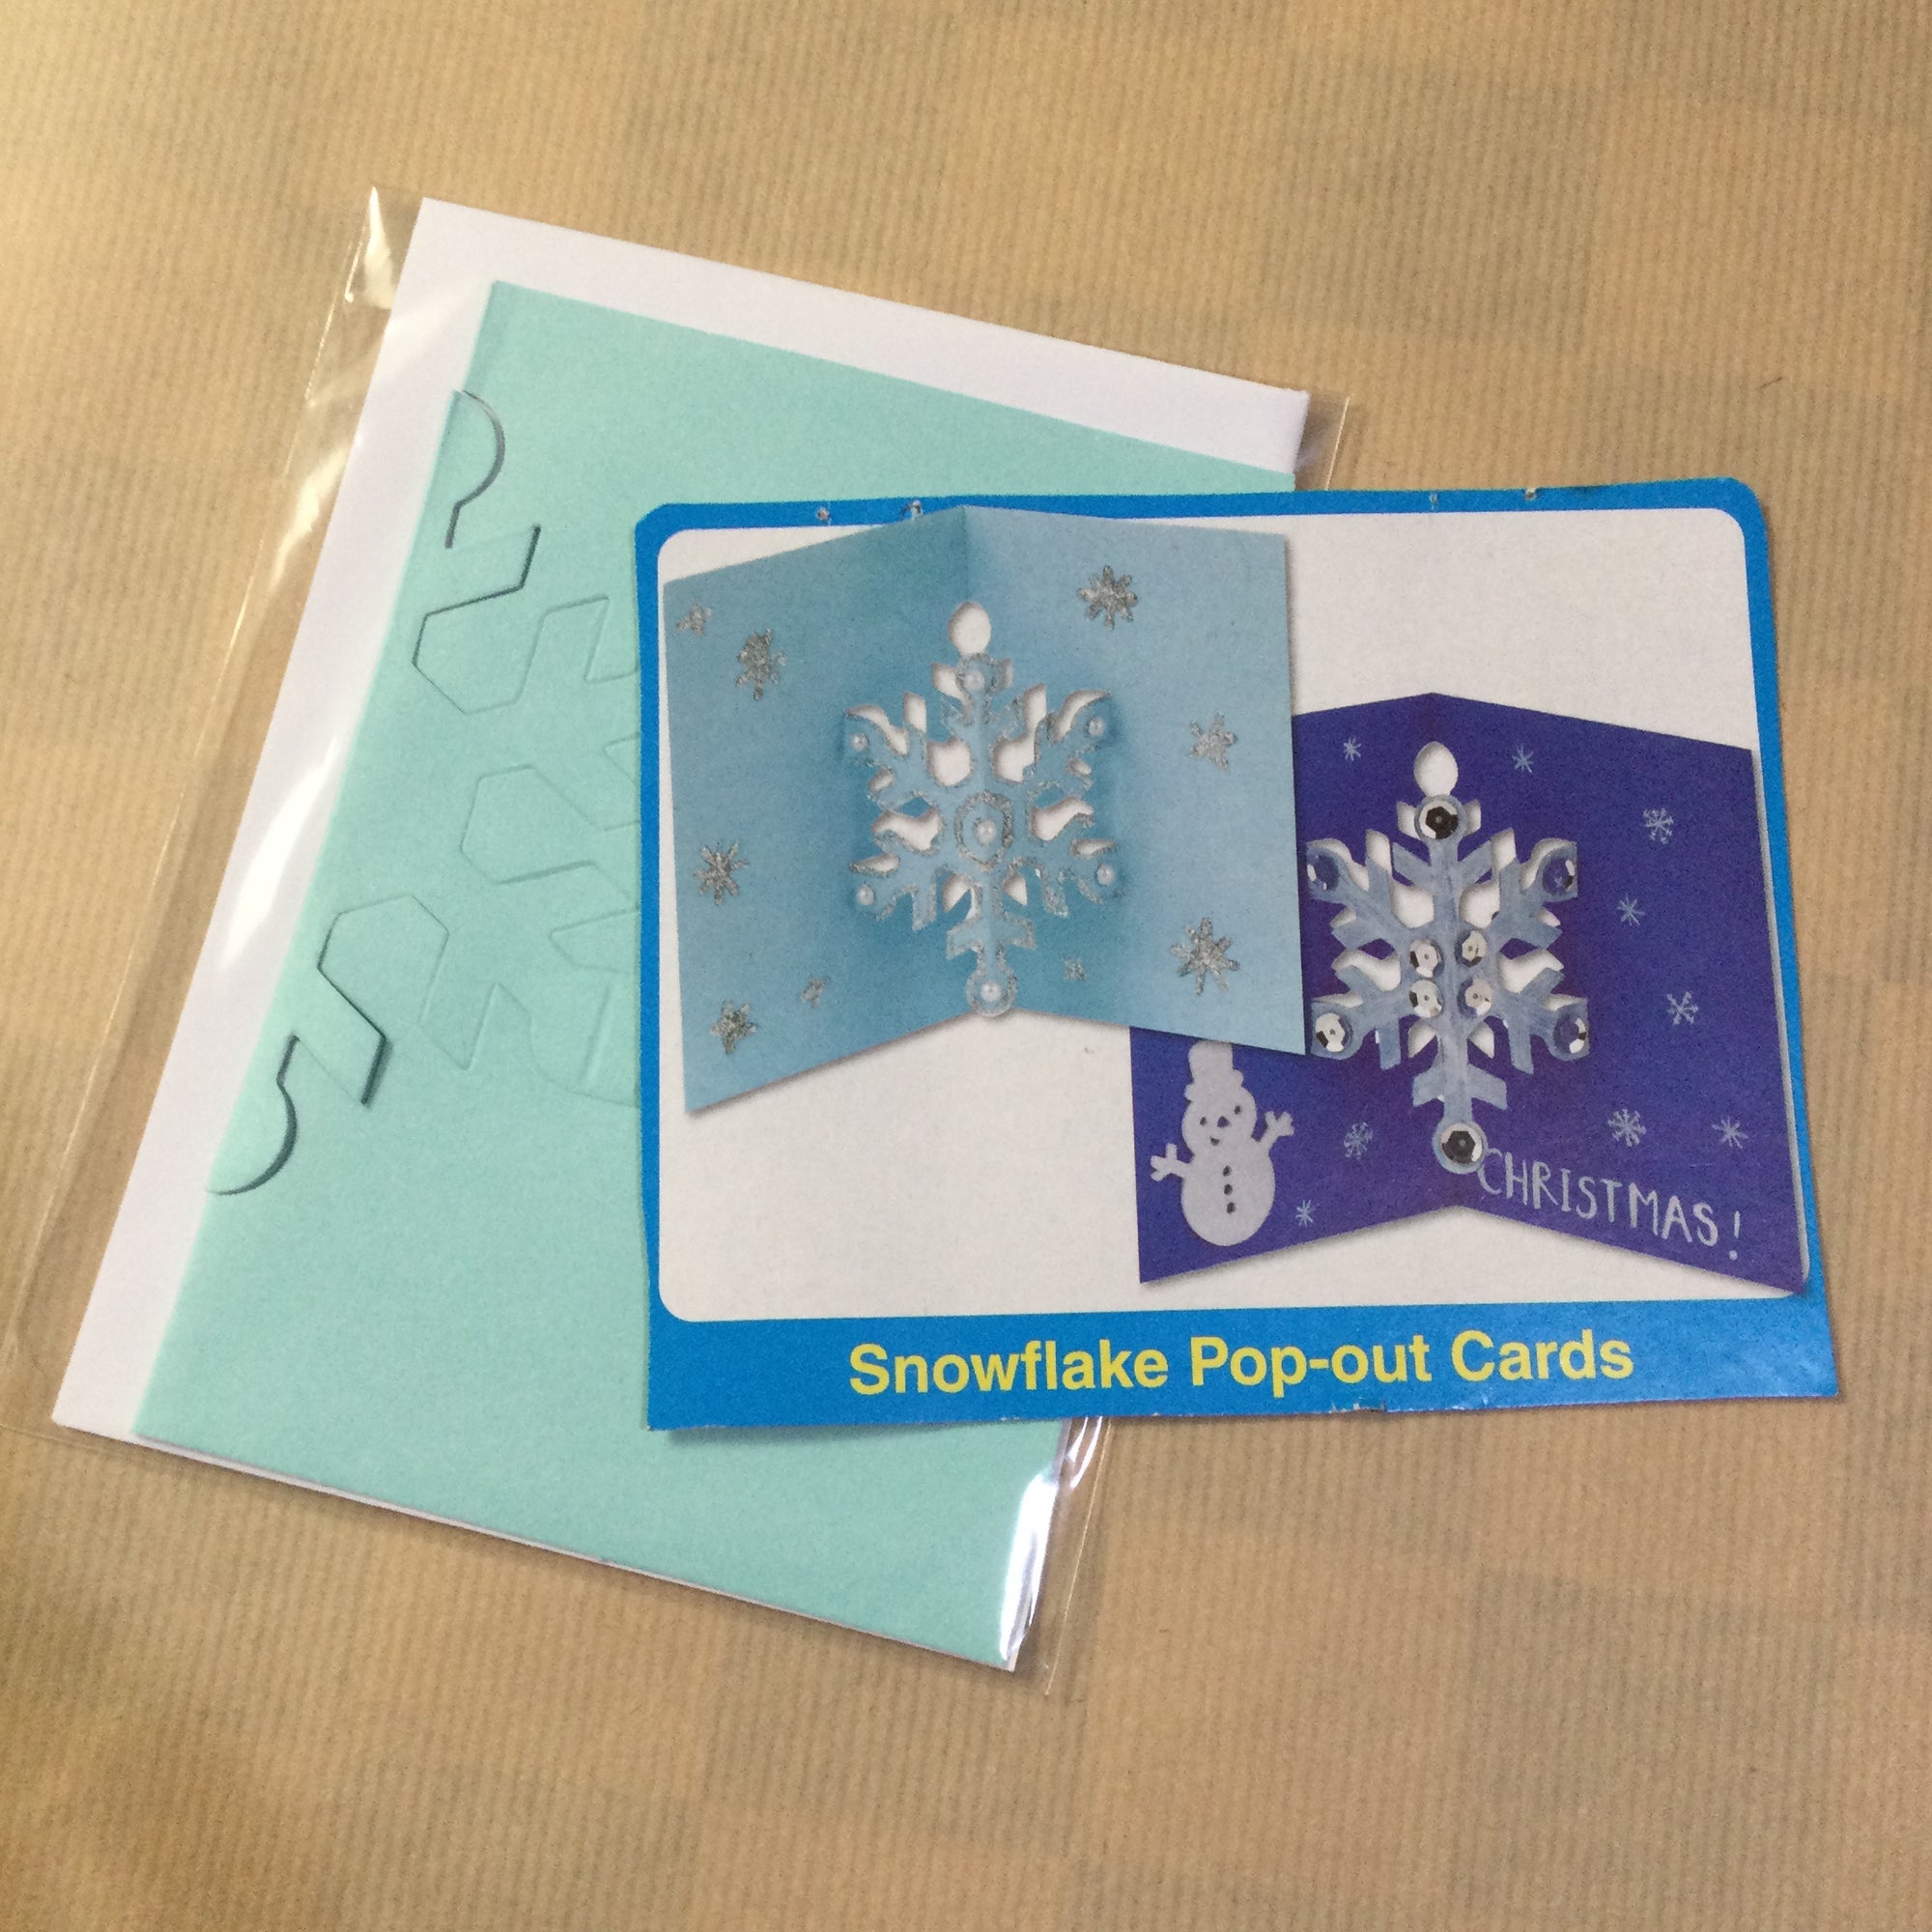 Design Your Own Snowflake Pop-out Cards